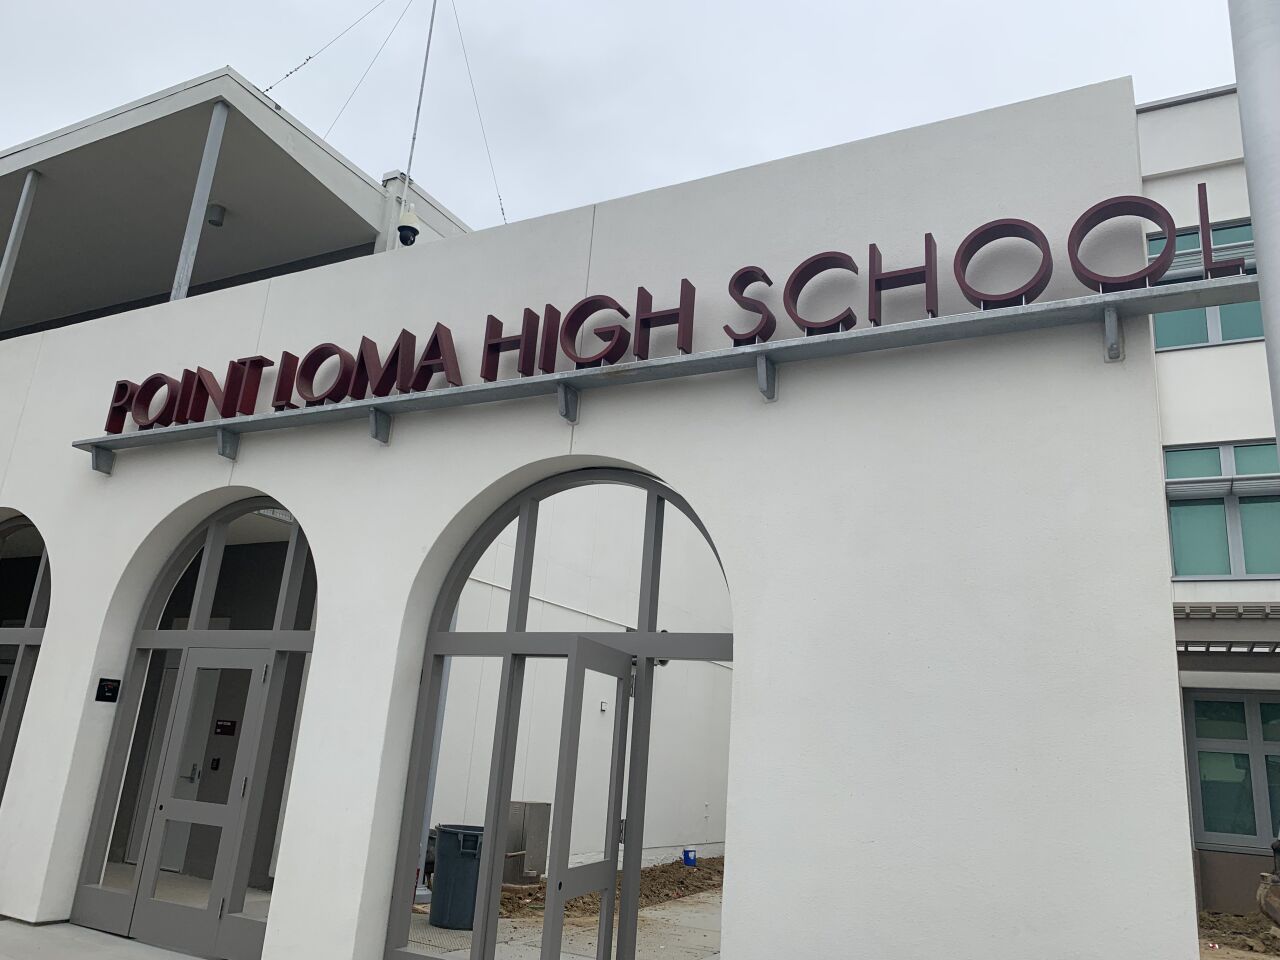 Point Loma High School has completed its largest modernization project since it first opened in 1925.